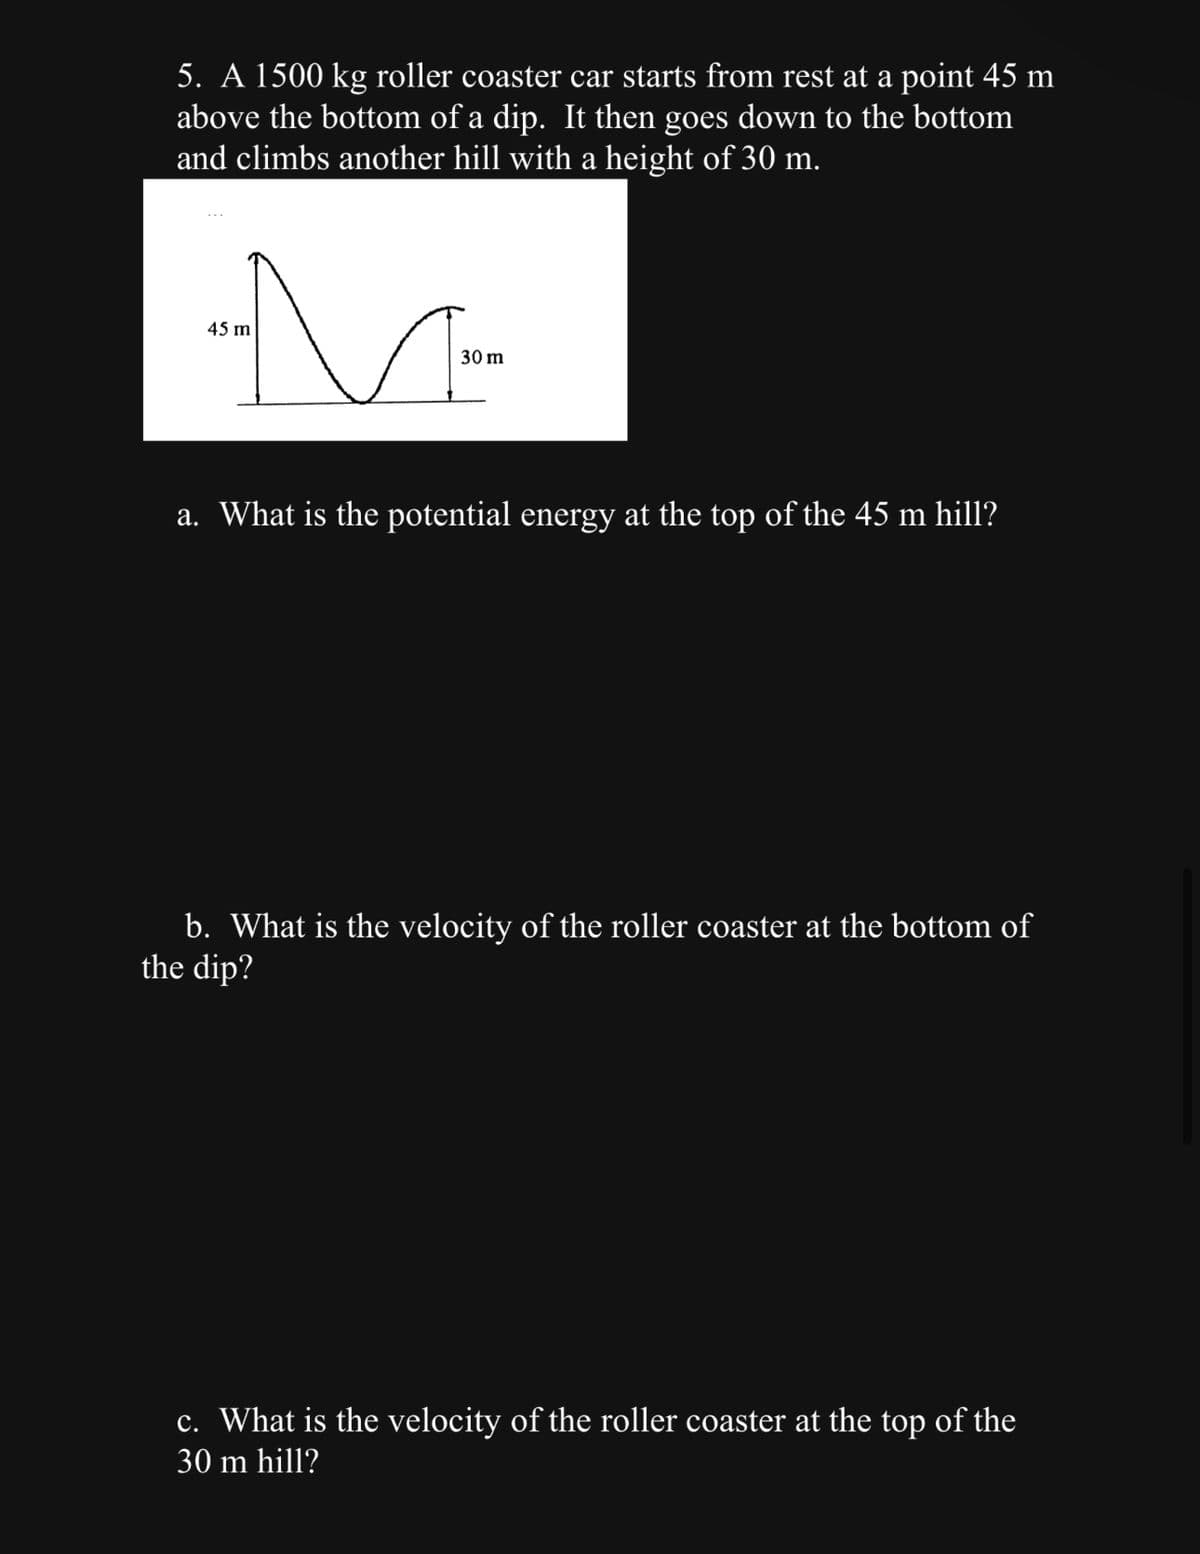 5. A 1500 kg roller coaster car starts from rest at a point 45 m
above the bottom of a dip. It then goes down to the bottom
and climbs another hill with a height of 30 m.
M
30 m
45 m
a. What is the potential energy at the top of the 45 m hill?
b. What is the velocity of the roller coaster at the bottom of
the dip?
c. What is the velocity of the roller coaster at the top of the
30 m hill?